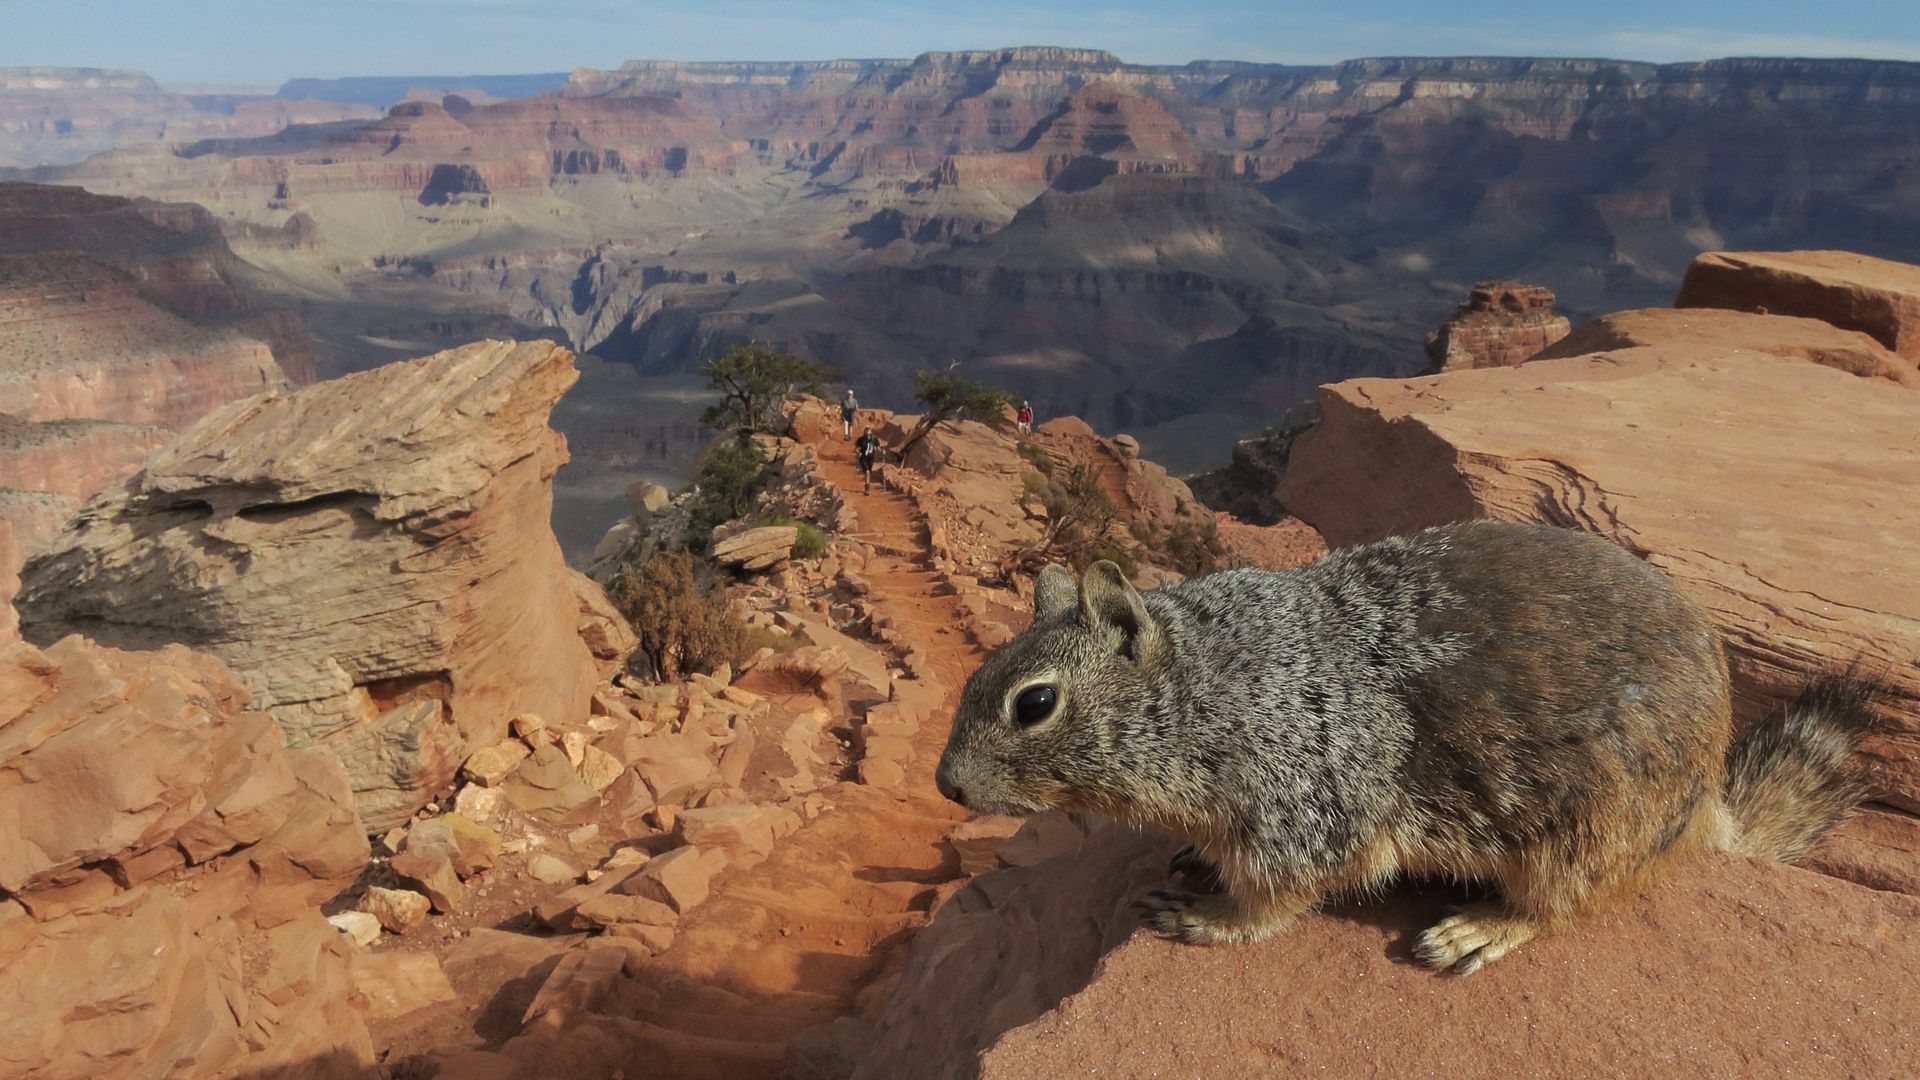  A squirrel stands at the South Keibab Trail at the Grand Canyon South Rim on July 13, 2014 